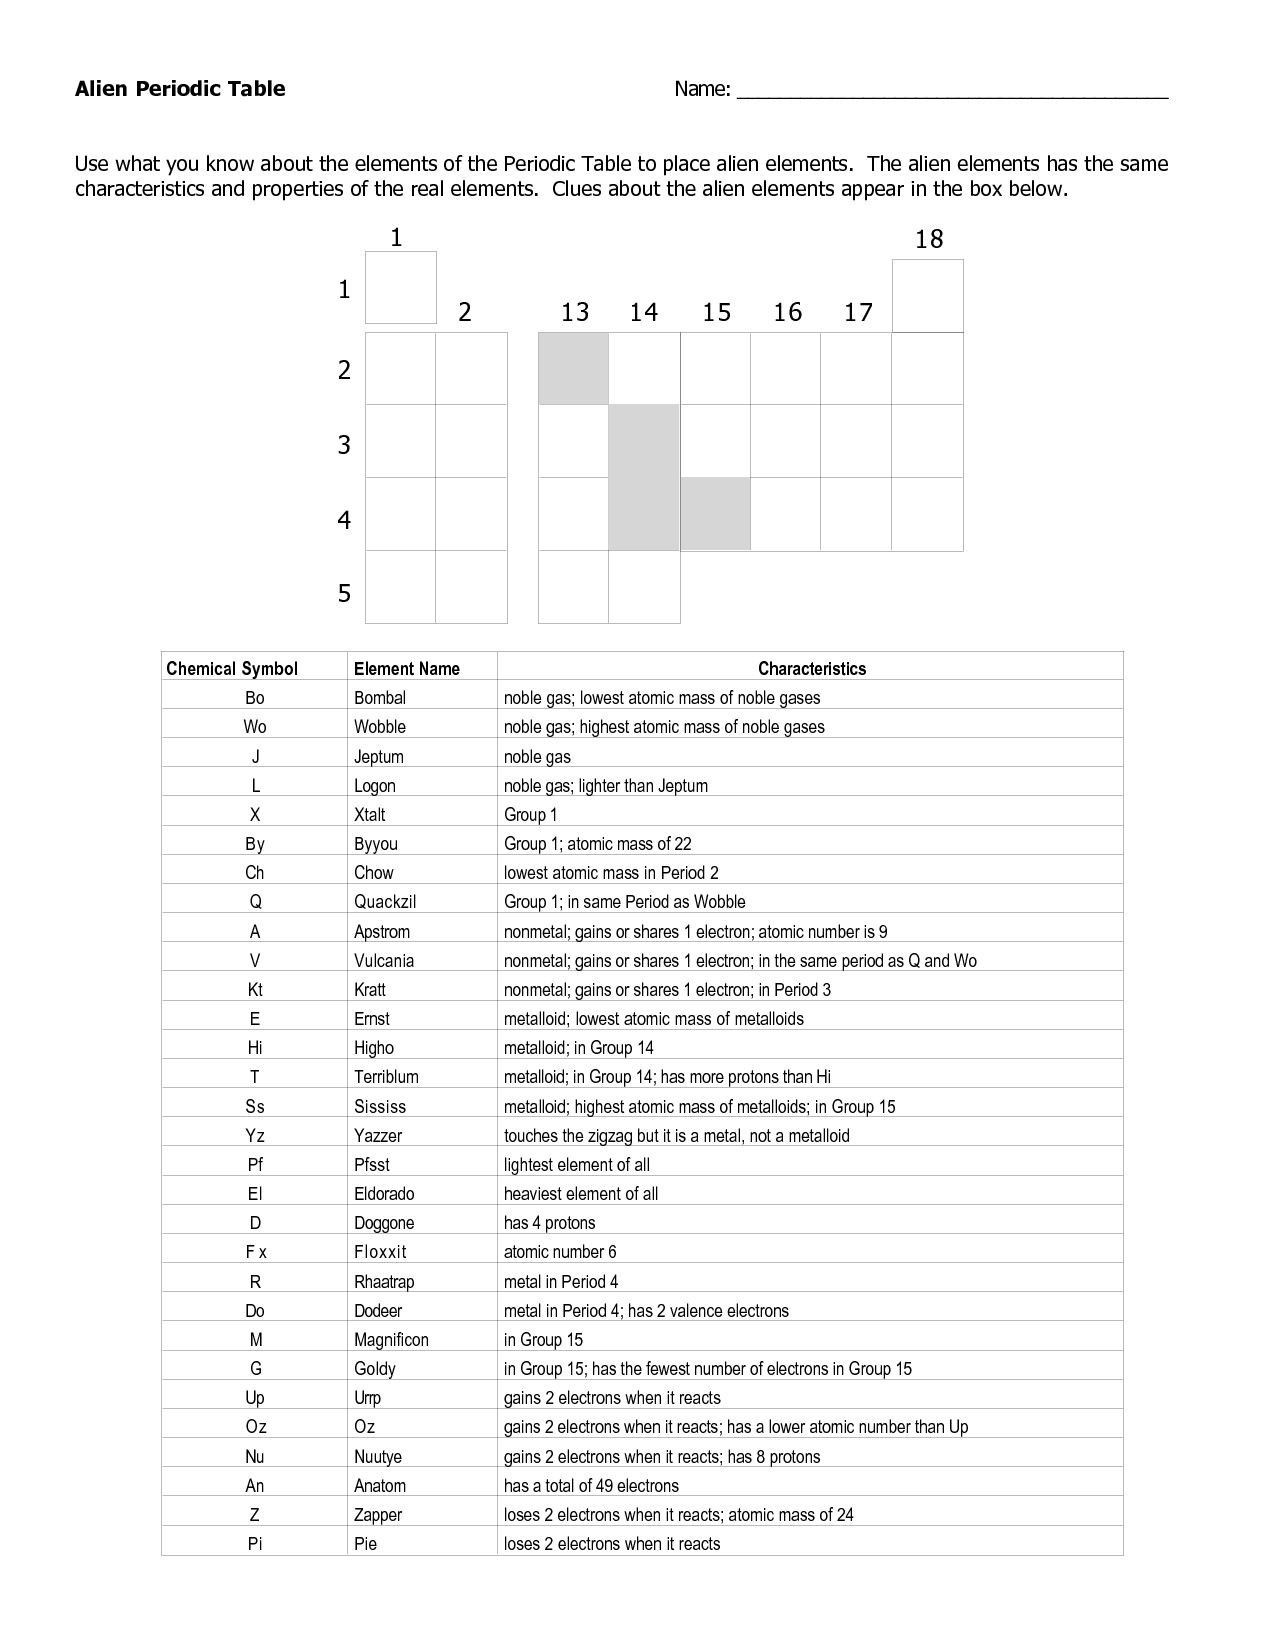 Periodic Table Scavenger Hunt Worksheet the Periodic Table and Periodic Law Worksheet Answers